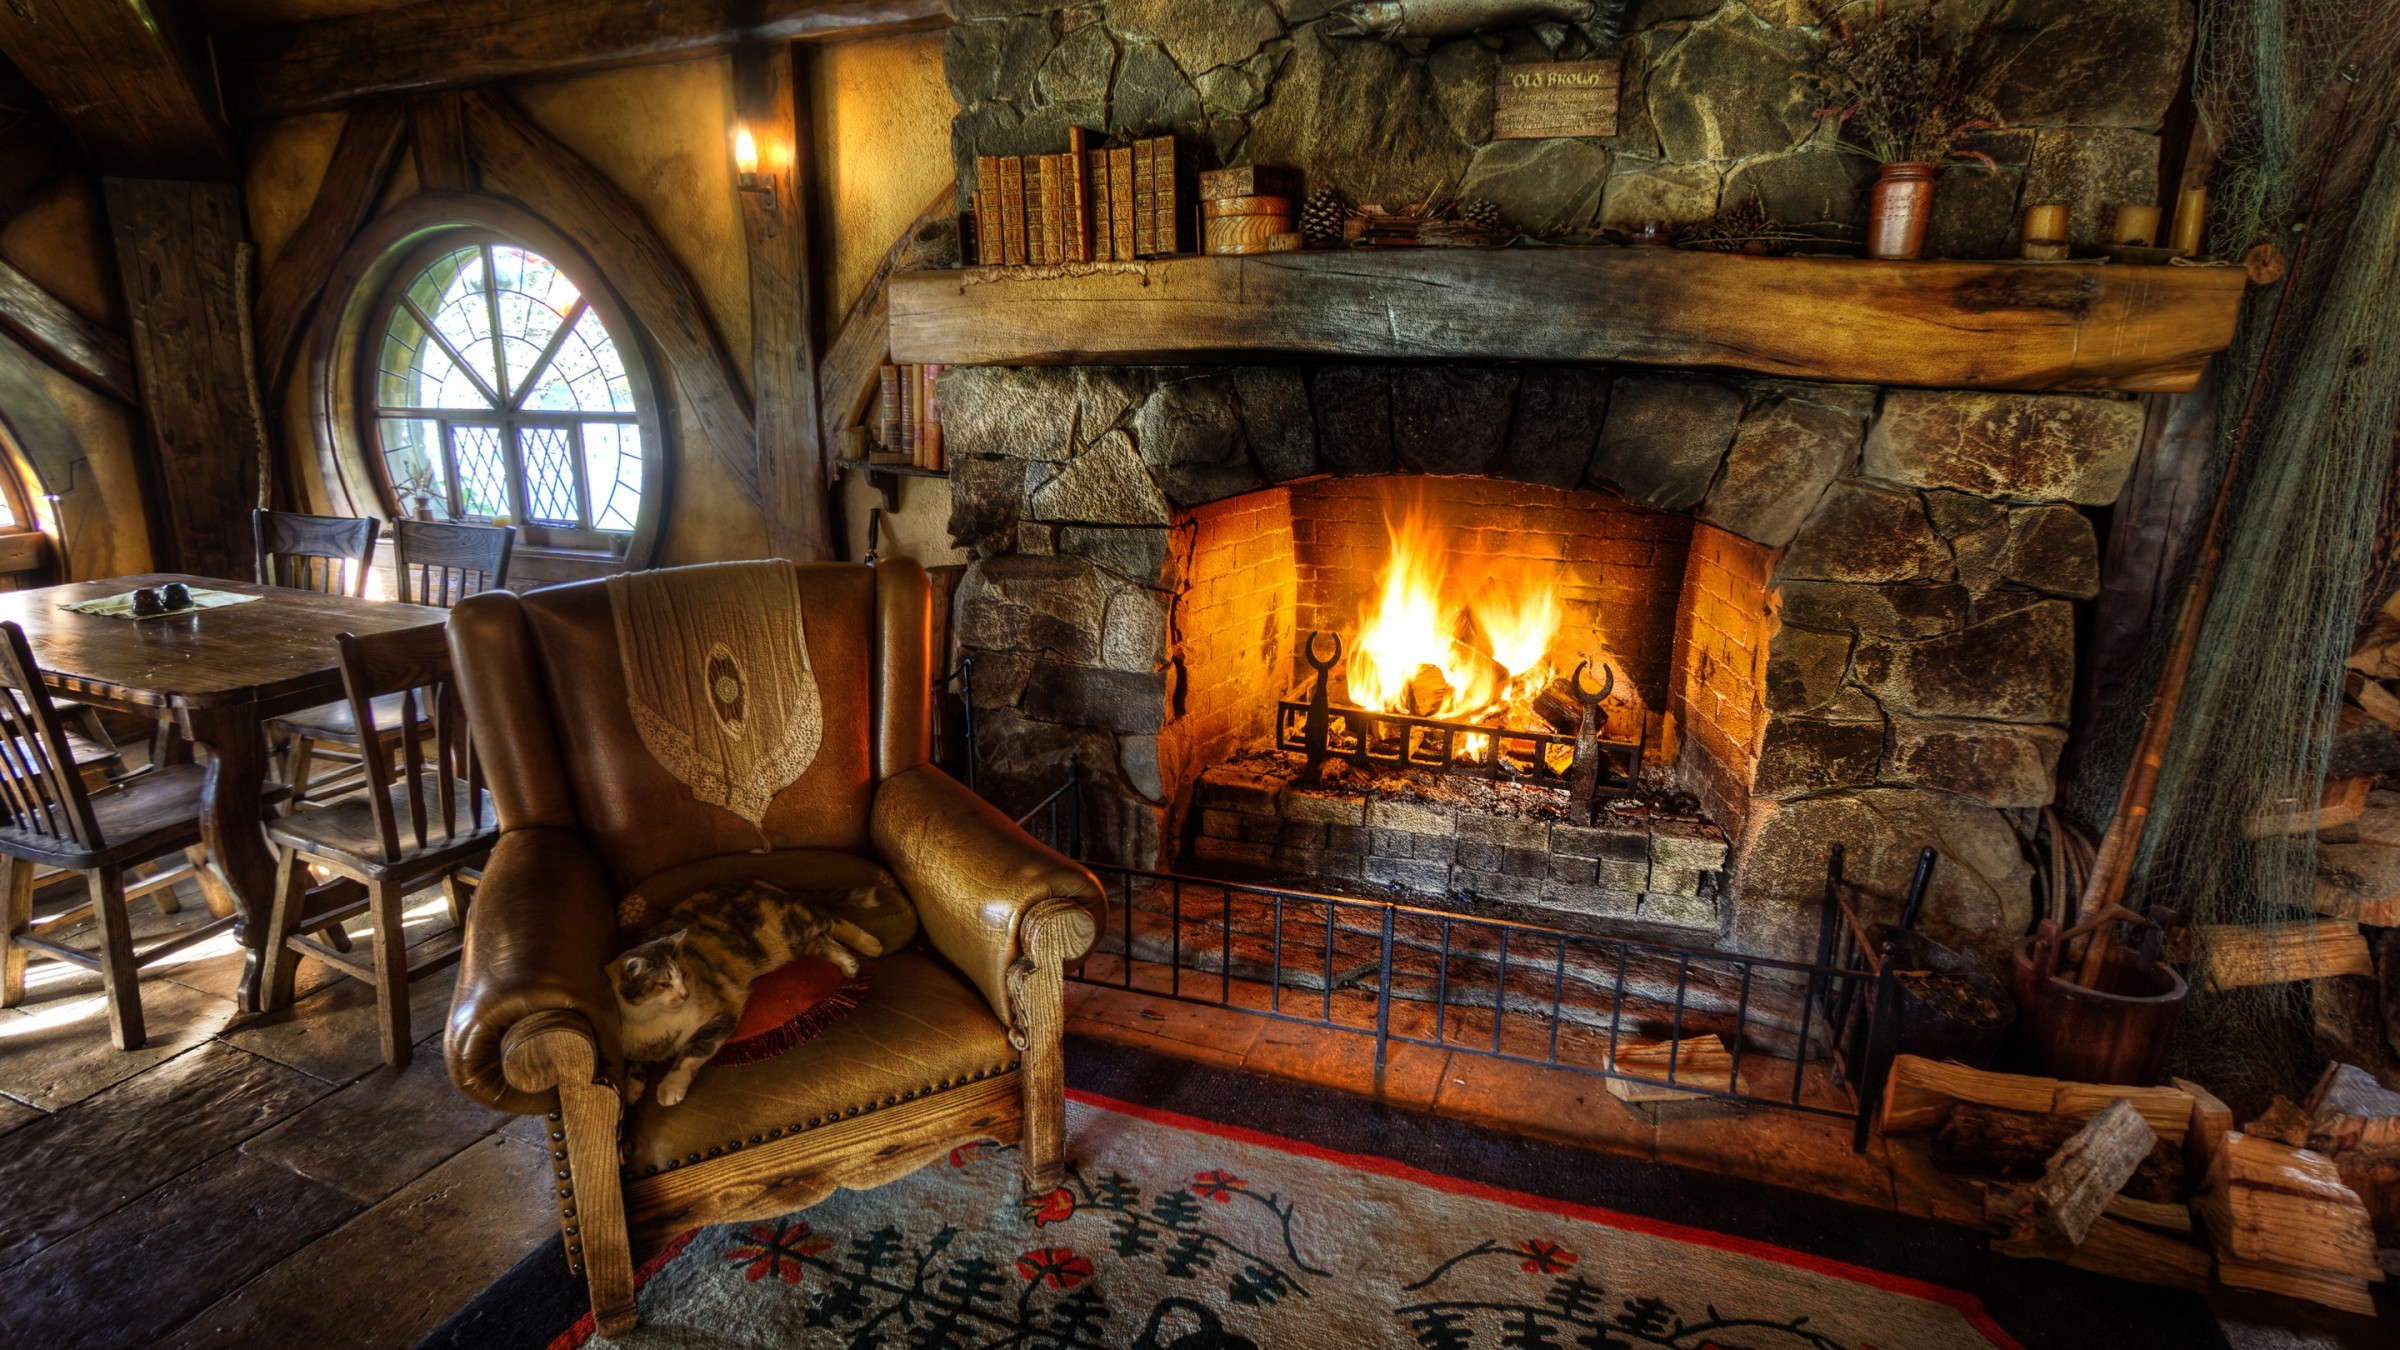 Wallpaper, cat, wood, indoors, fire, HDR, fireplace, interior design, cottage, estate, living room, hearth 2400x1350